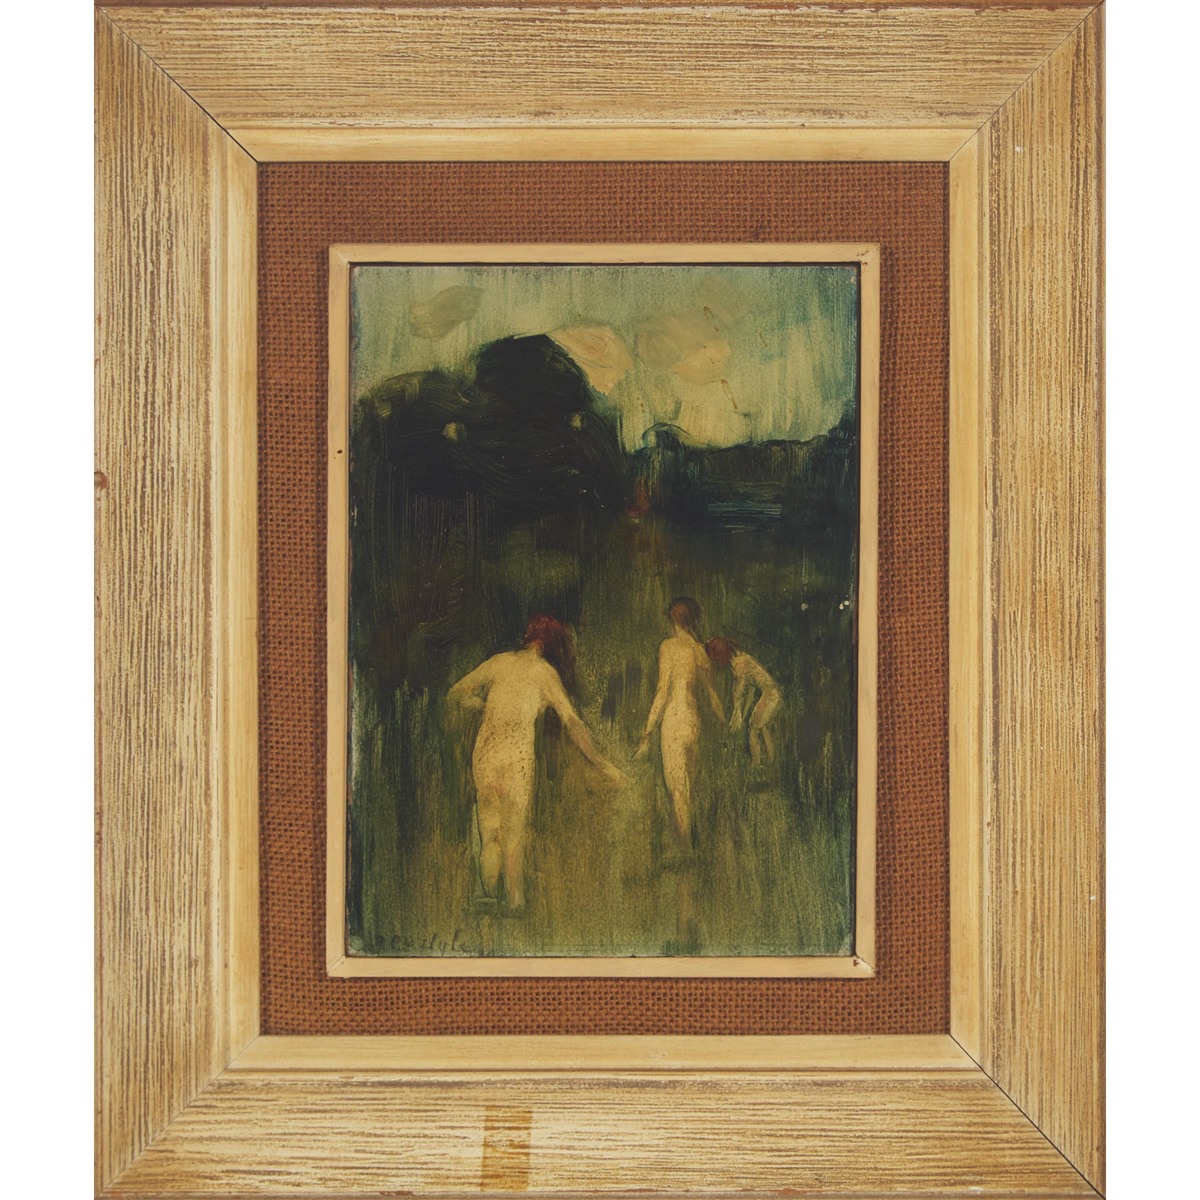 Florence Carlyle, OSA (1864-1923), UNTITLED (FIGURES), 7.5 x 5.75 in — 19.1 x 14.6 cm - Image 2 of 4